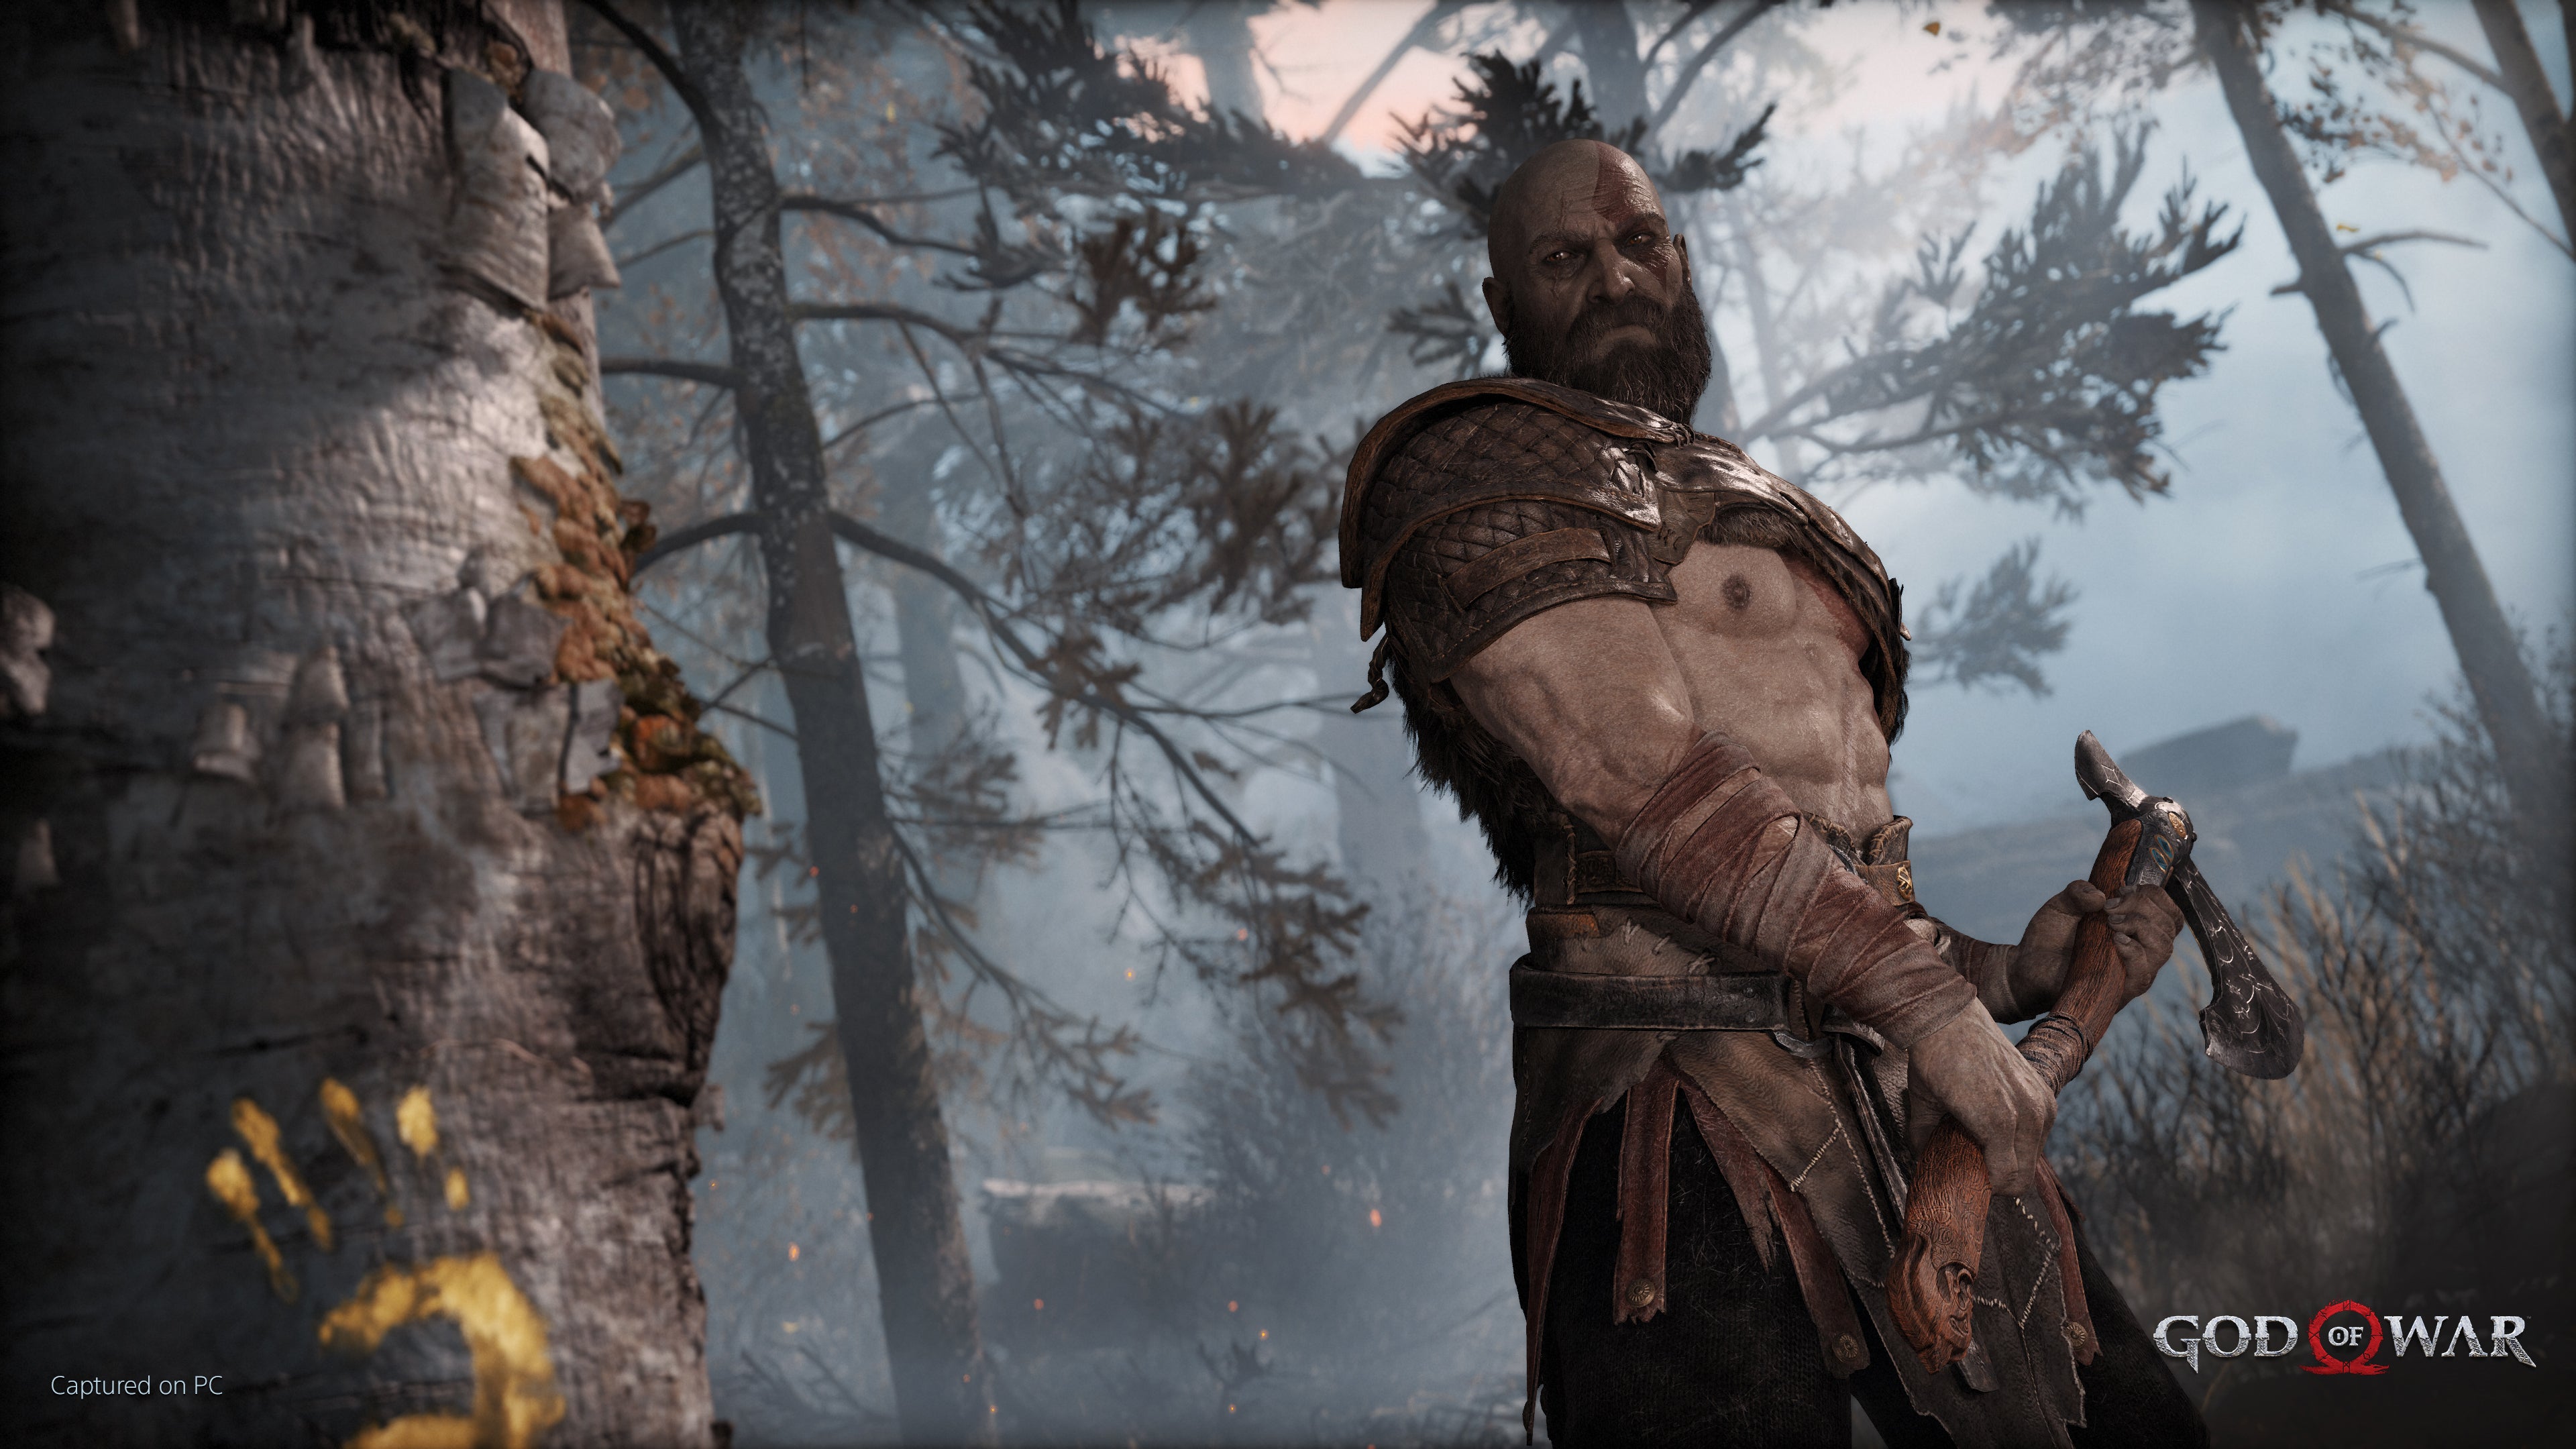 Image for God of War PC: here are the recommended specs and features